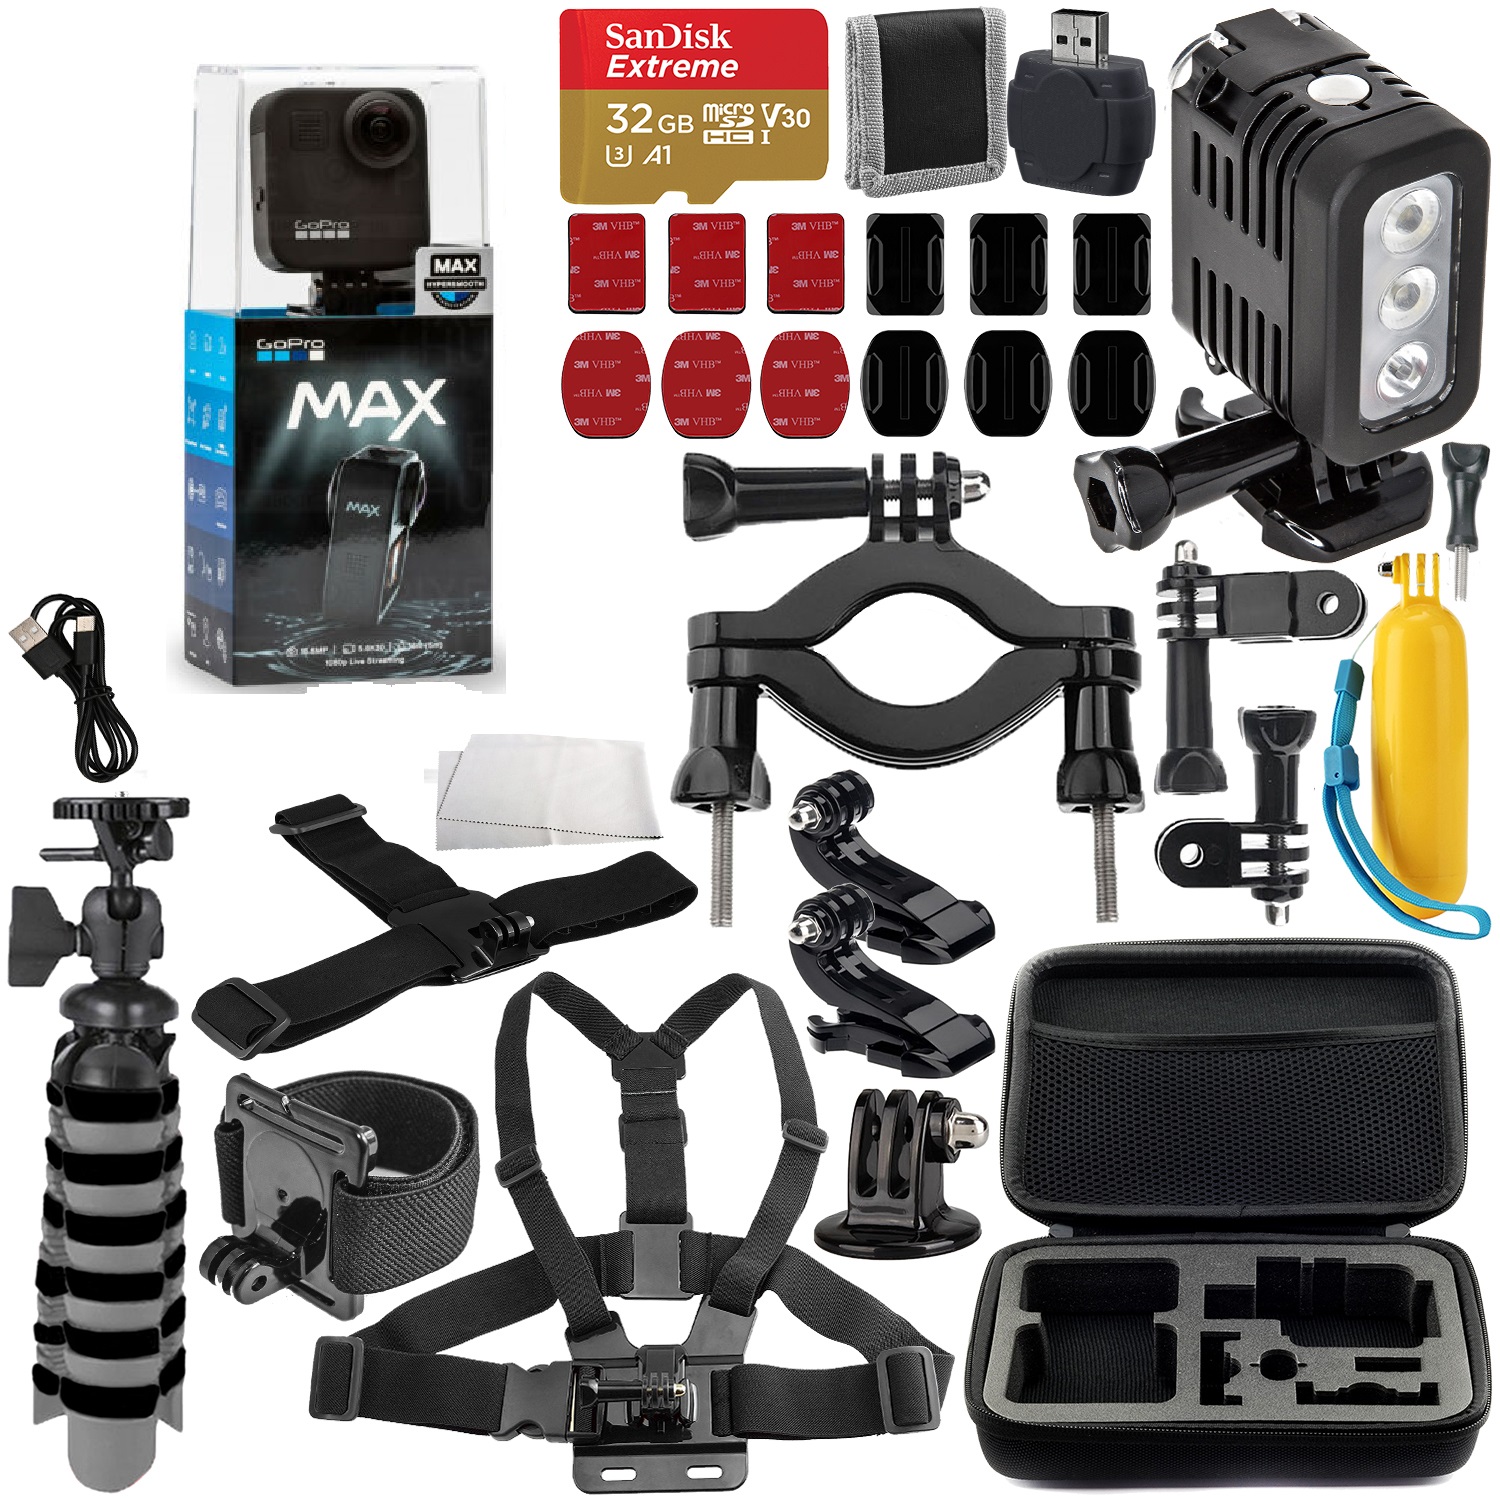 GoPro MAX 360 Action Camera - CHDHZ-201 with Deluxe Accessory Bundle